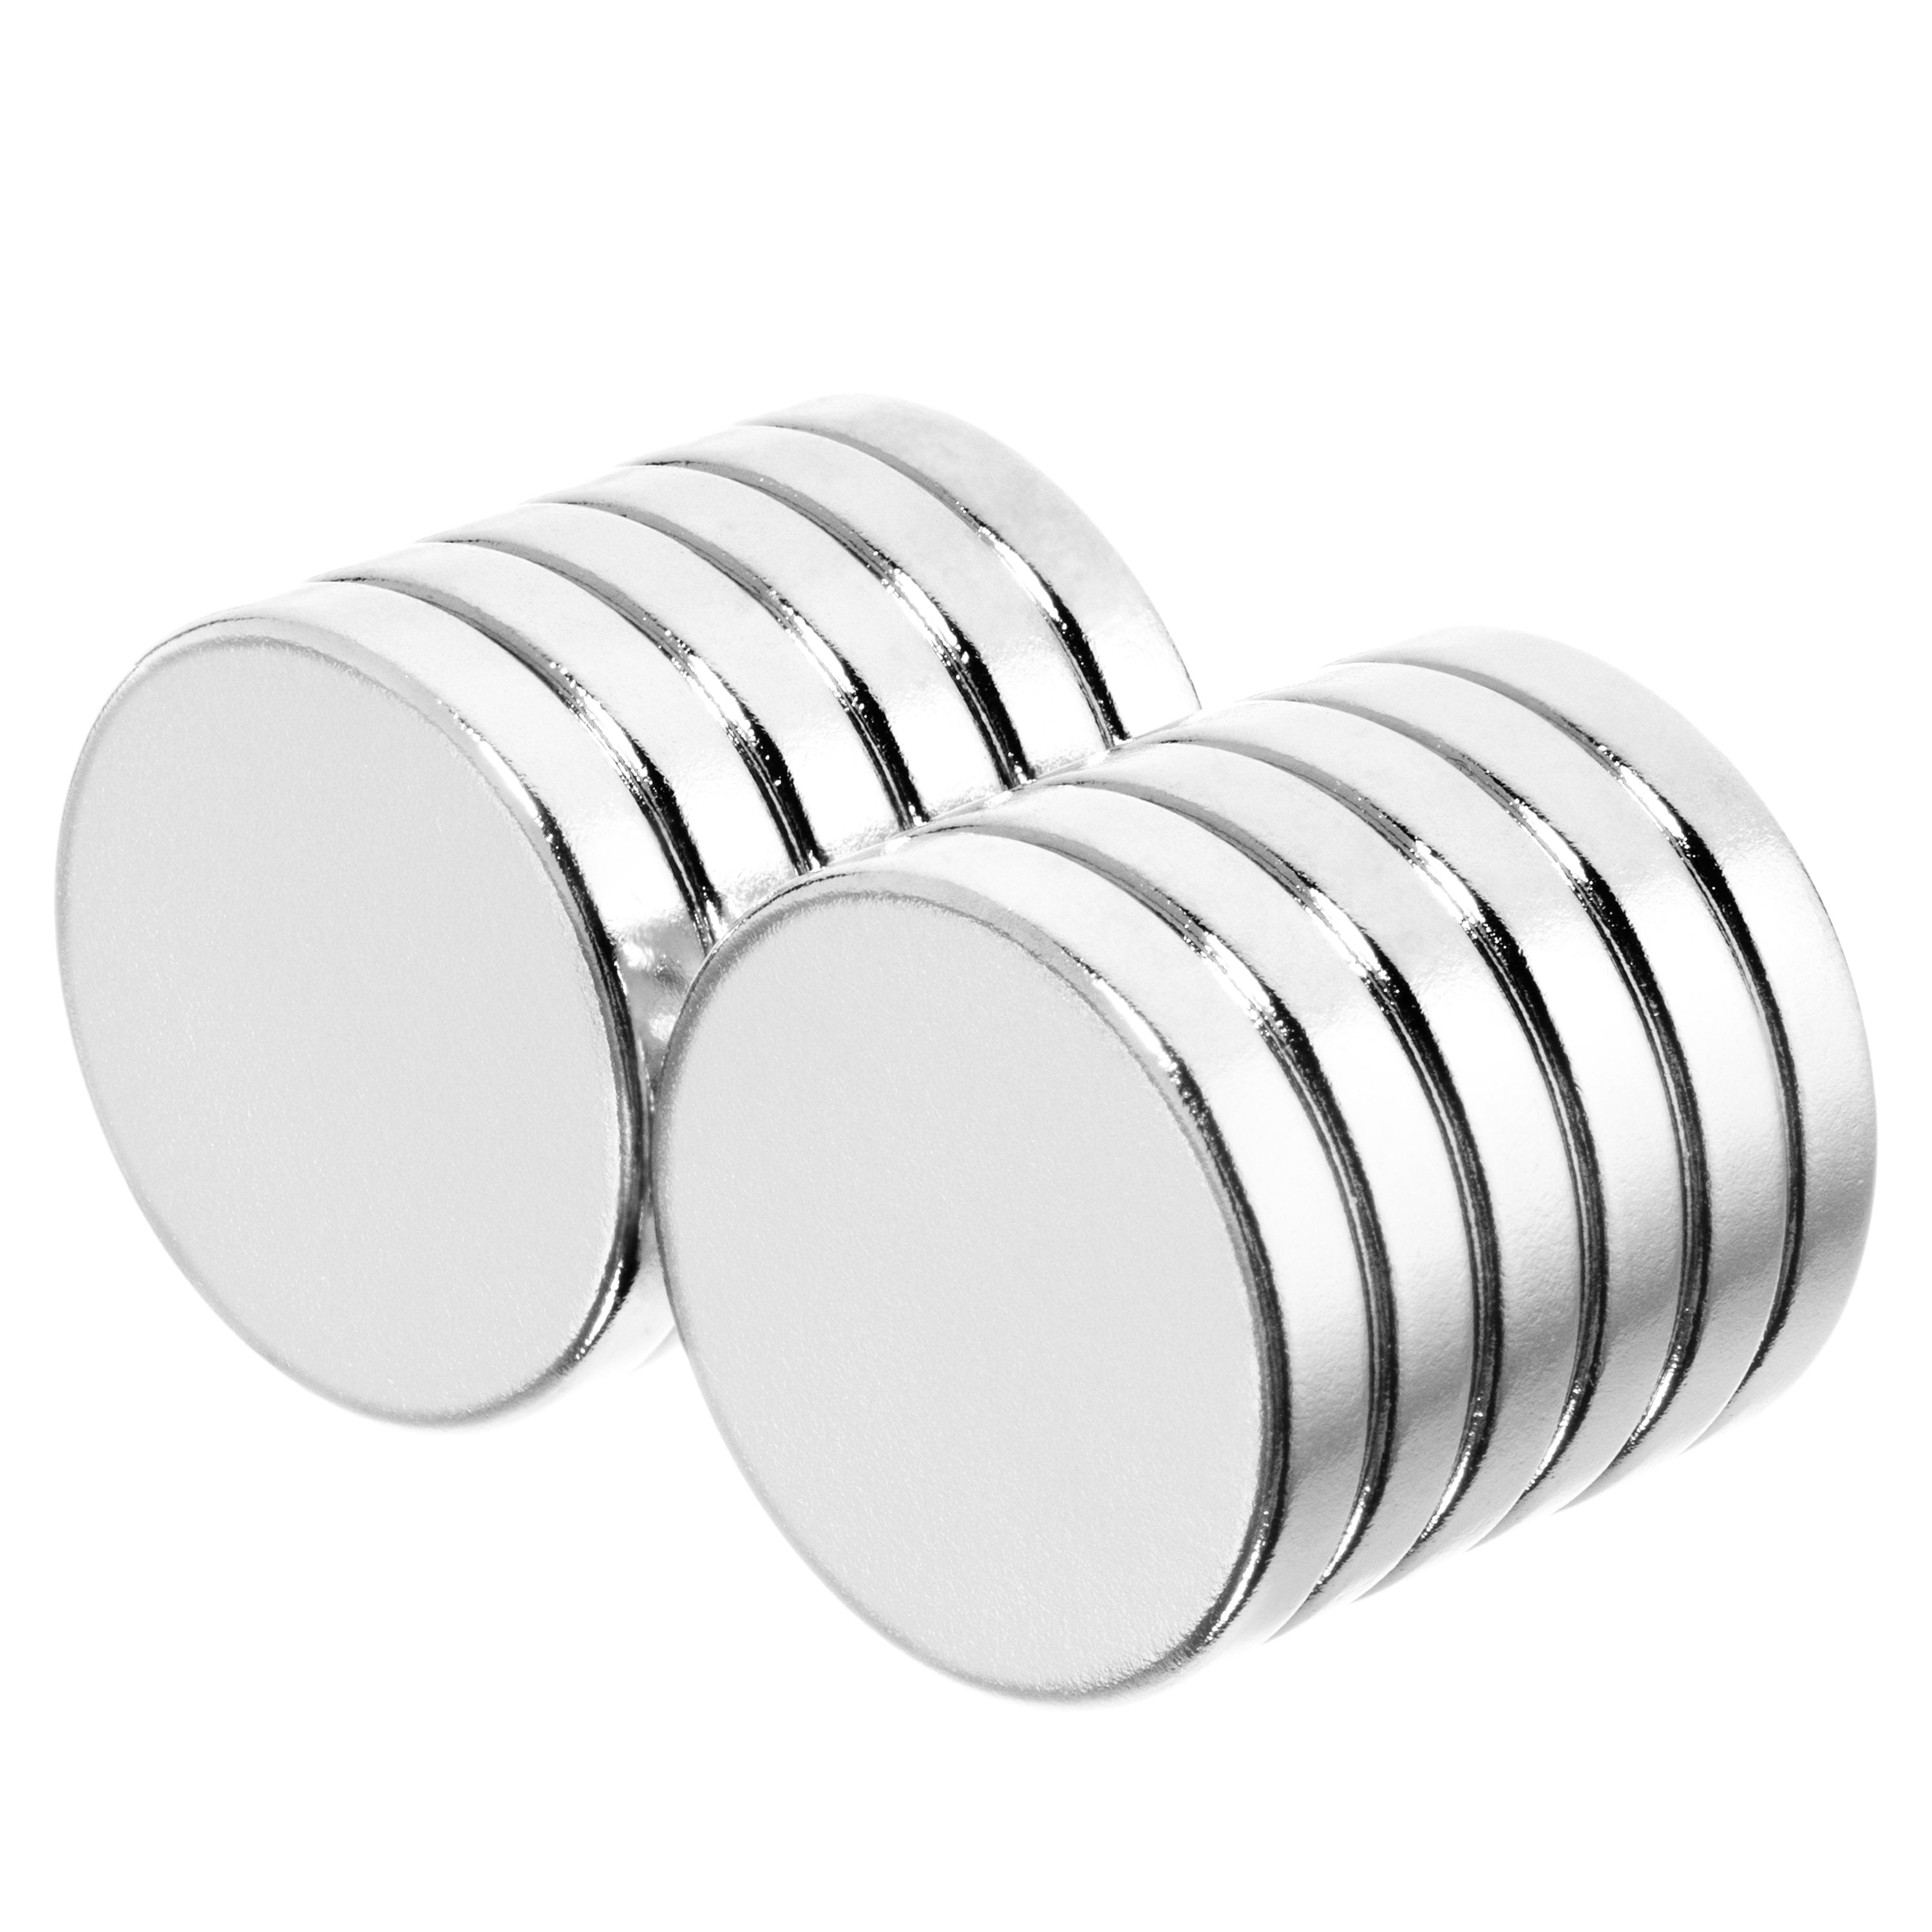 Dia 1.5 x 3/4" Neodymium Rare Earth Industrial Disc Magnets N40 Cylinder Magnets 